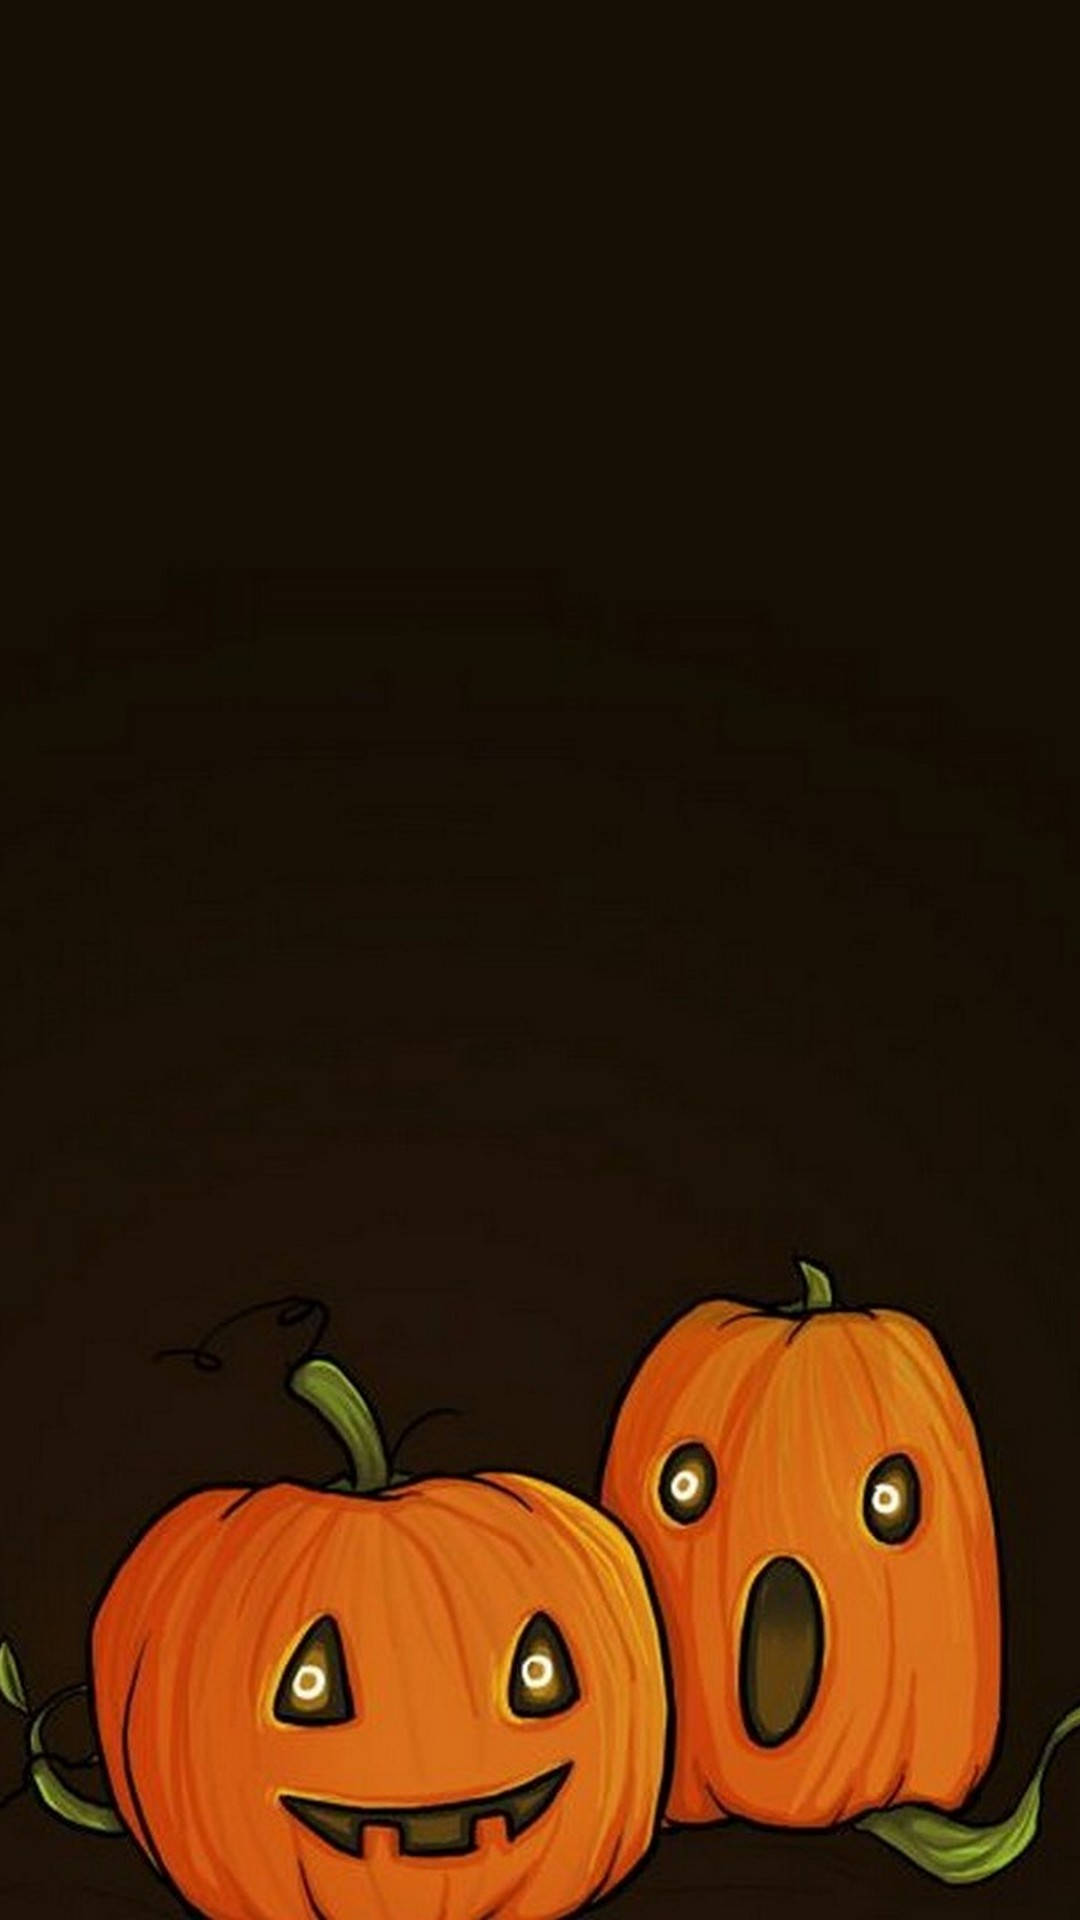 Download Get Ready For Halloween - Add Some Fun To Your Phone Wallpaper ...